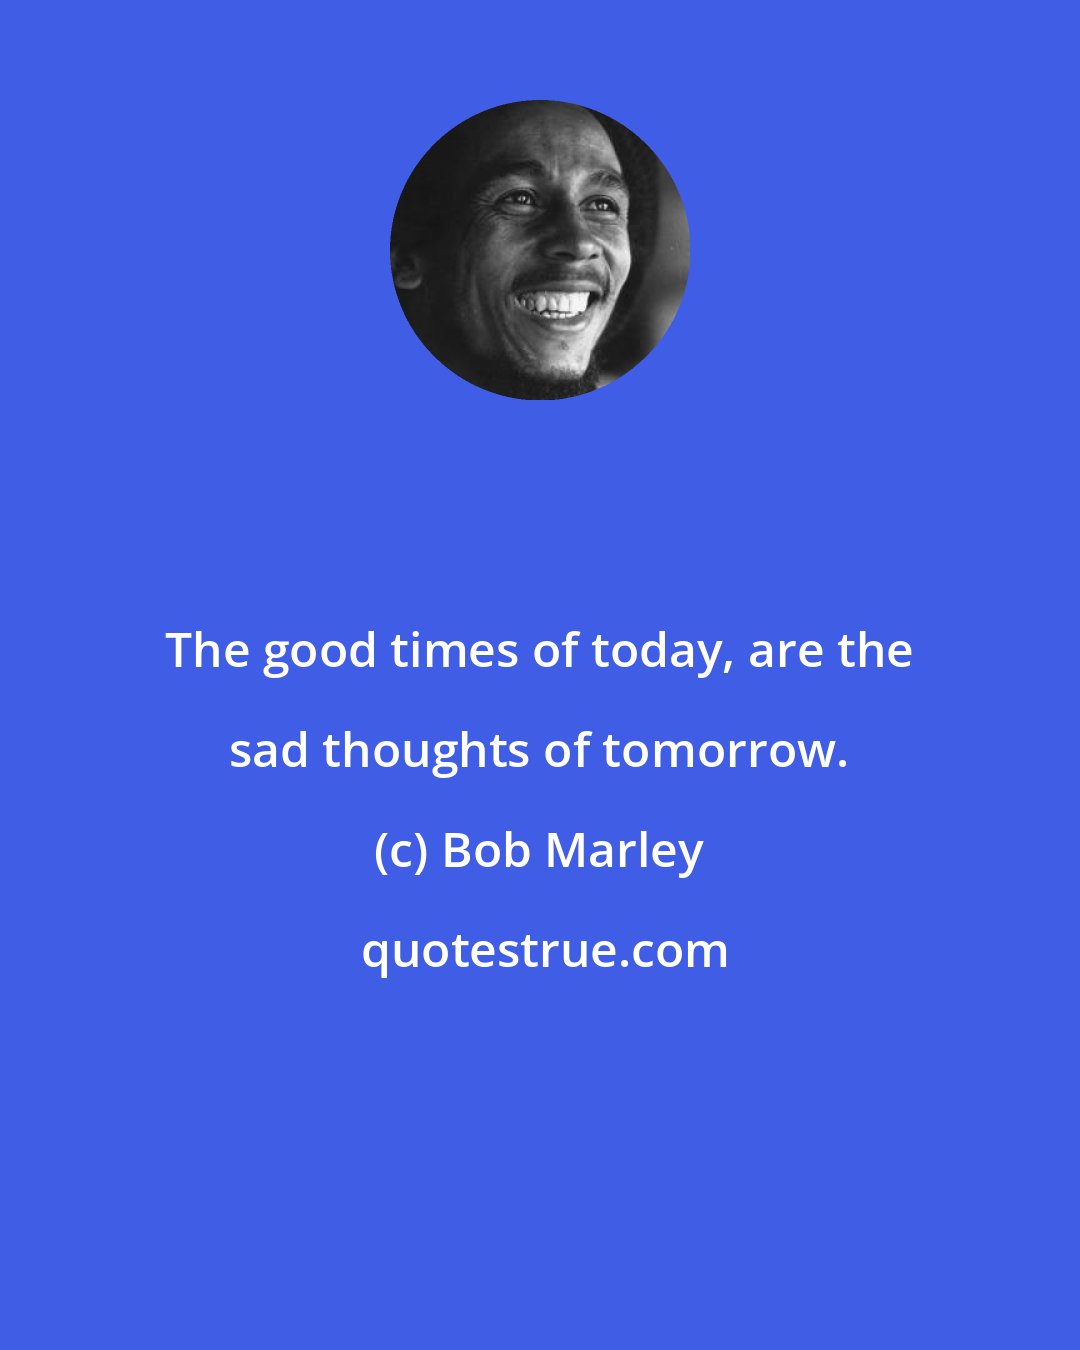 Bob Marley: The good times of today, are the sad thoughts of tomorrow.